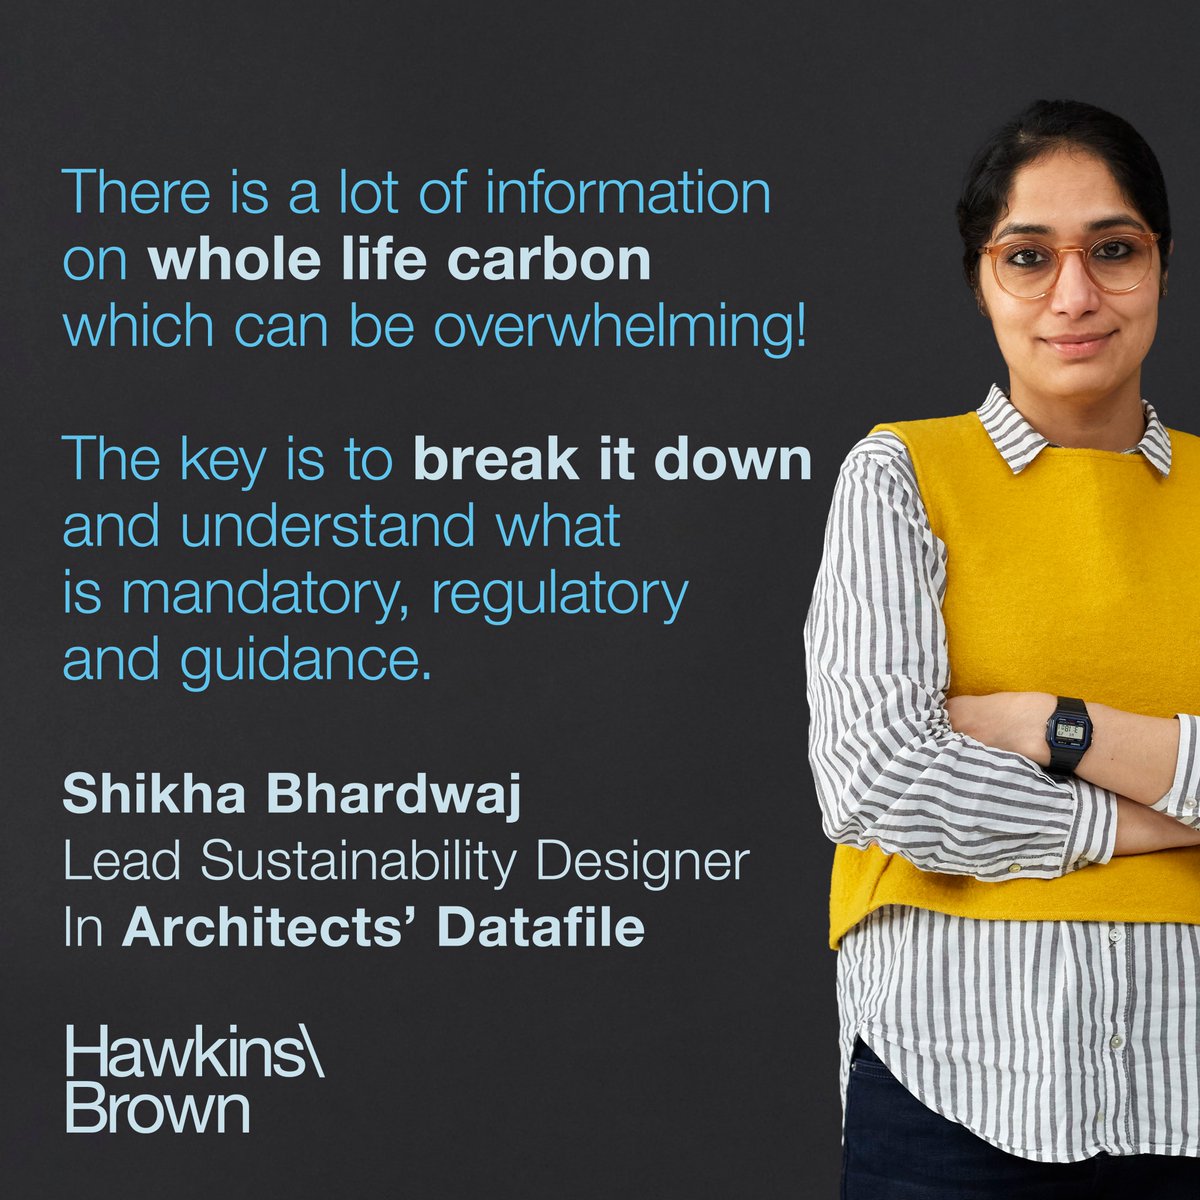 Speaking to @ArchitectsDF, lead sustainability designer Shikha Bhardwaj explains why understanding whole life carbon is no longer a choice - it’s essential knowledge for architects on every project.

Here's what you need to know: architectsdatafile.co.uk/news/view-poin…